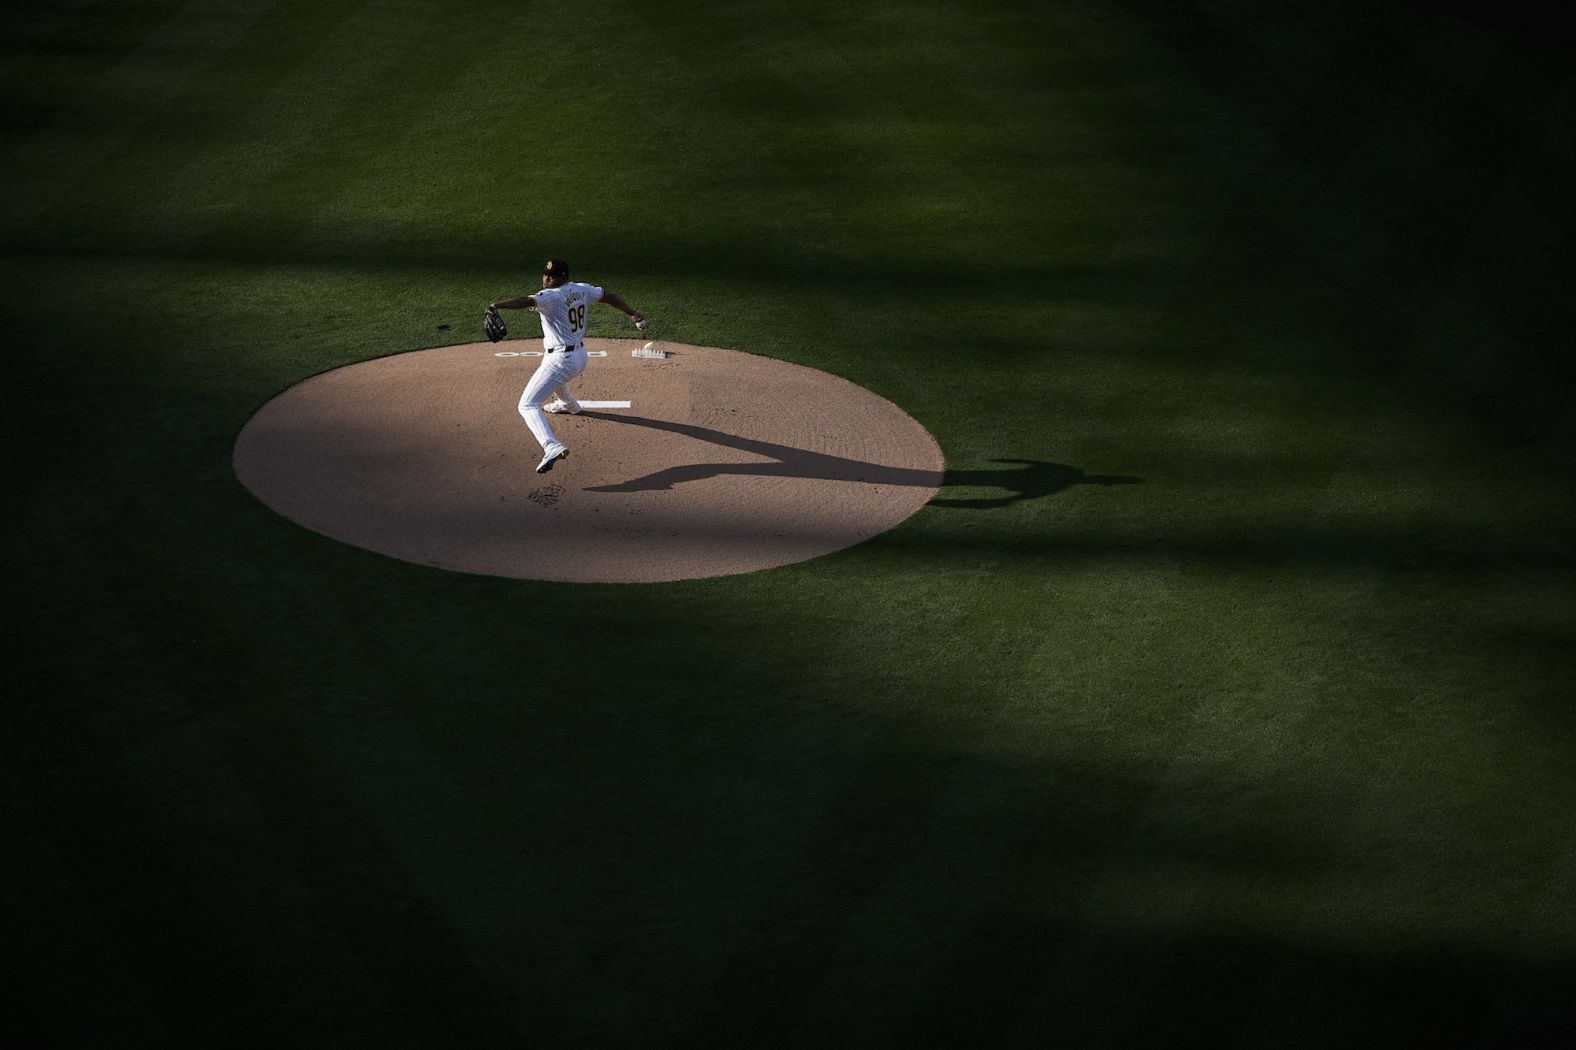 The San Diego Padres' Randy Vazquez pitches against Toronto during a Major League Baseball game on Saturday, April 20.